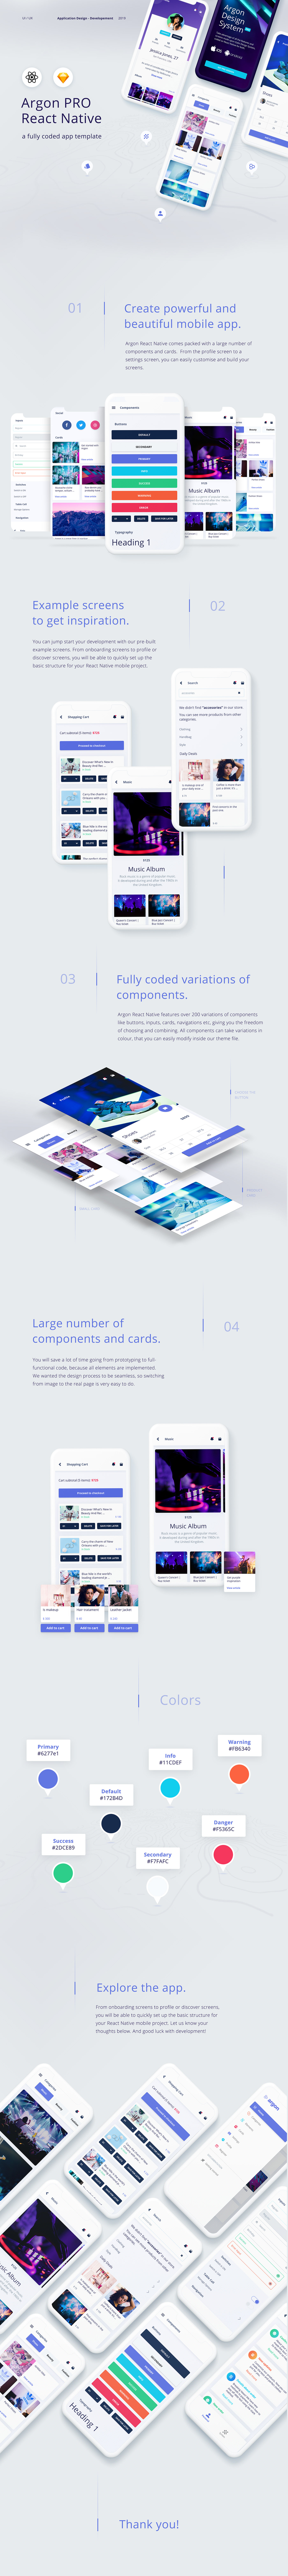 mobile app design template screens Ecommerce sketch ios android development